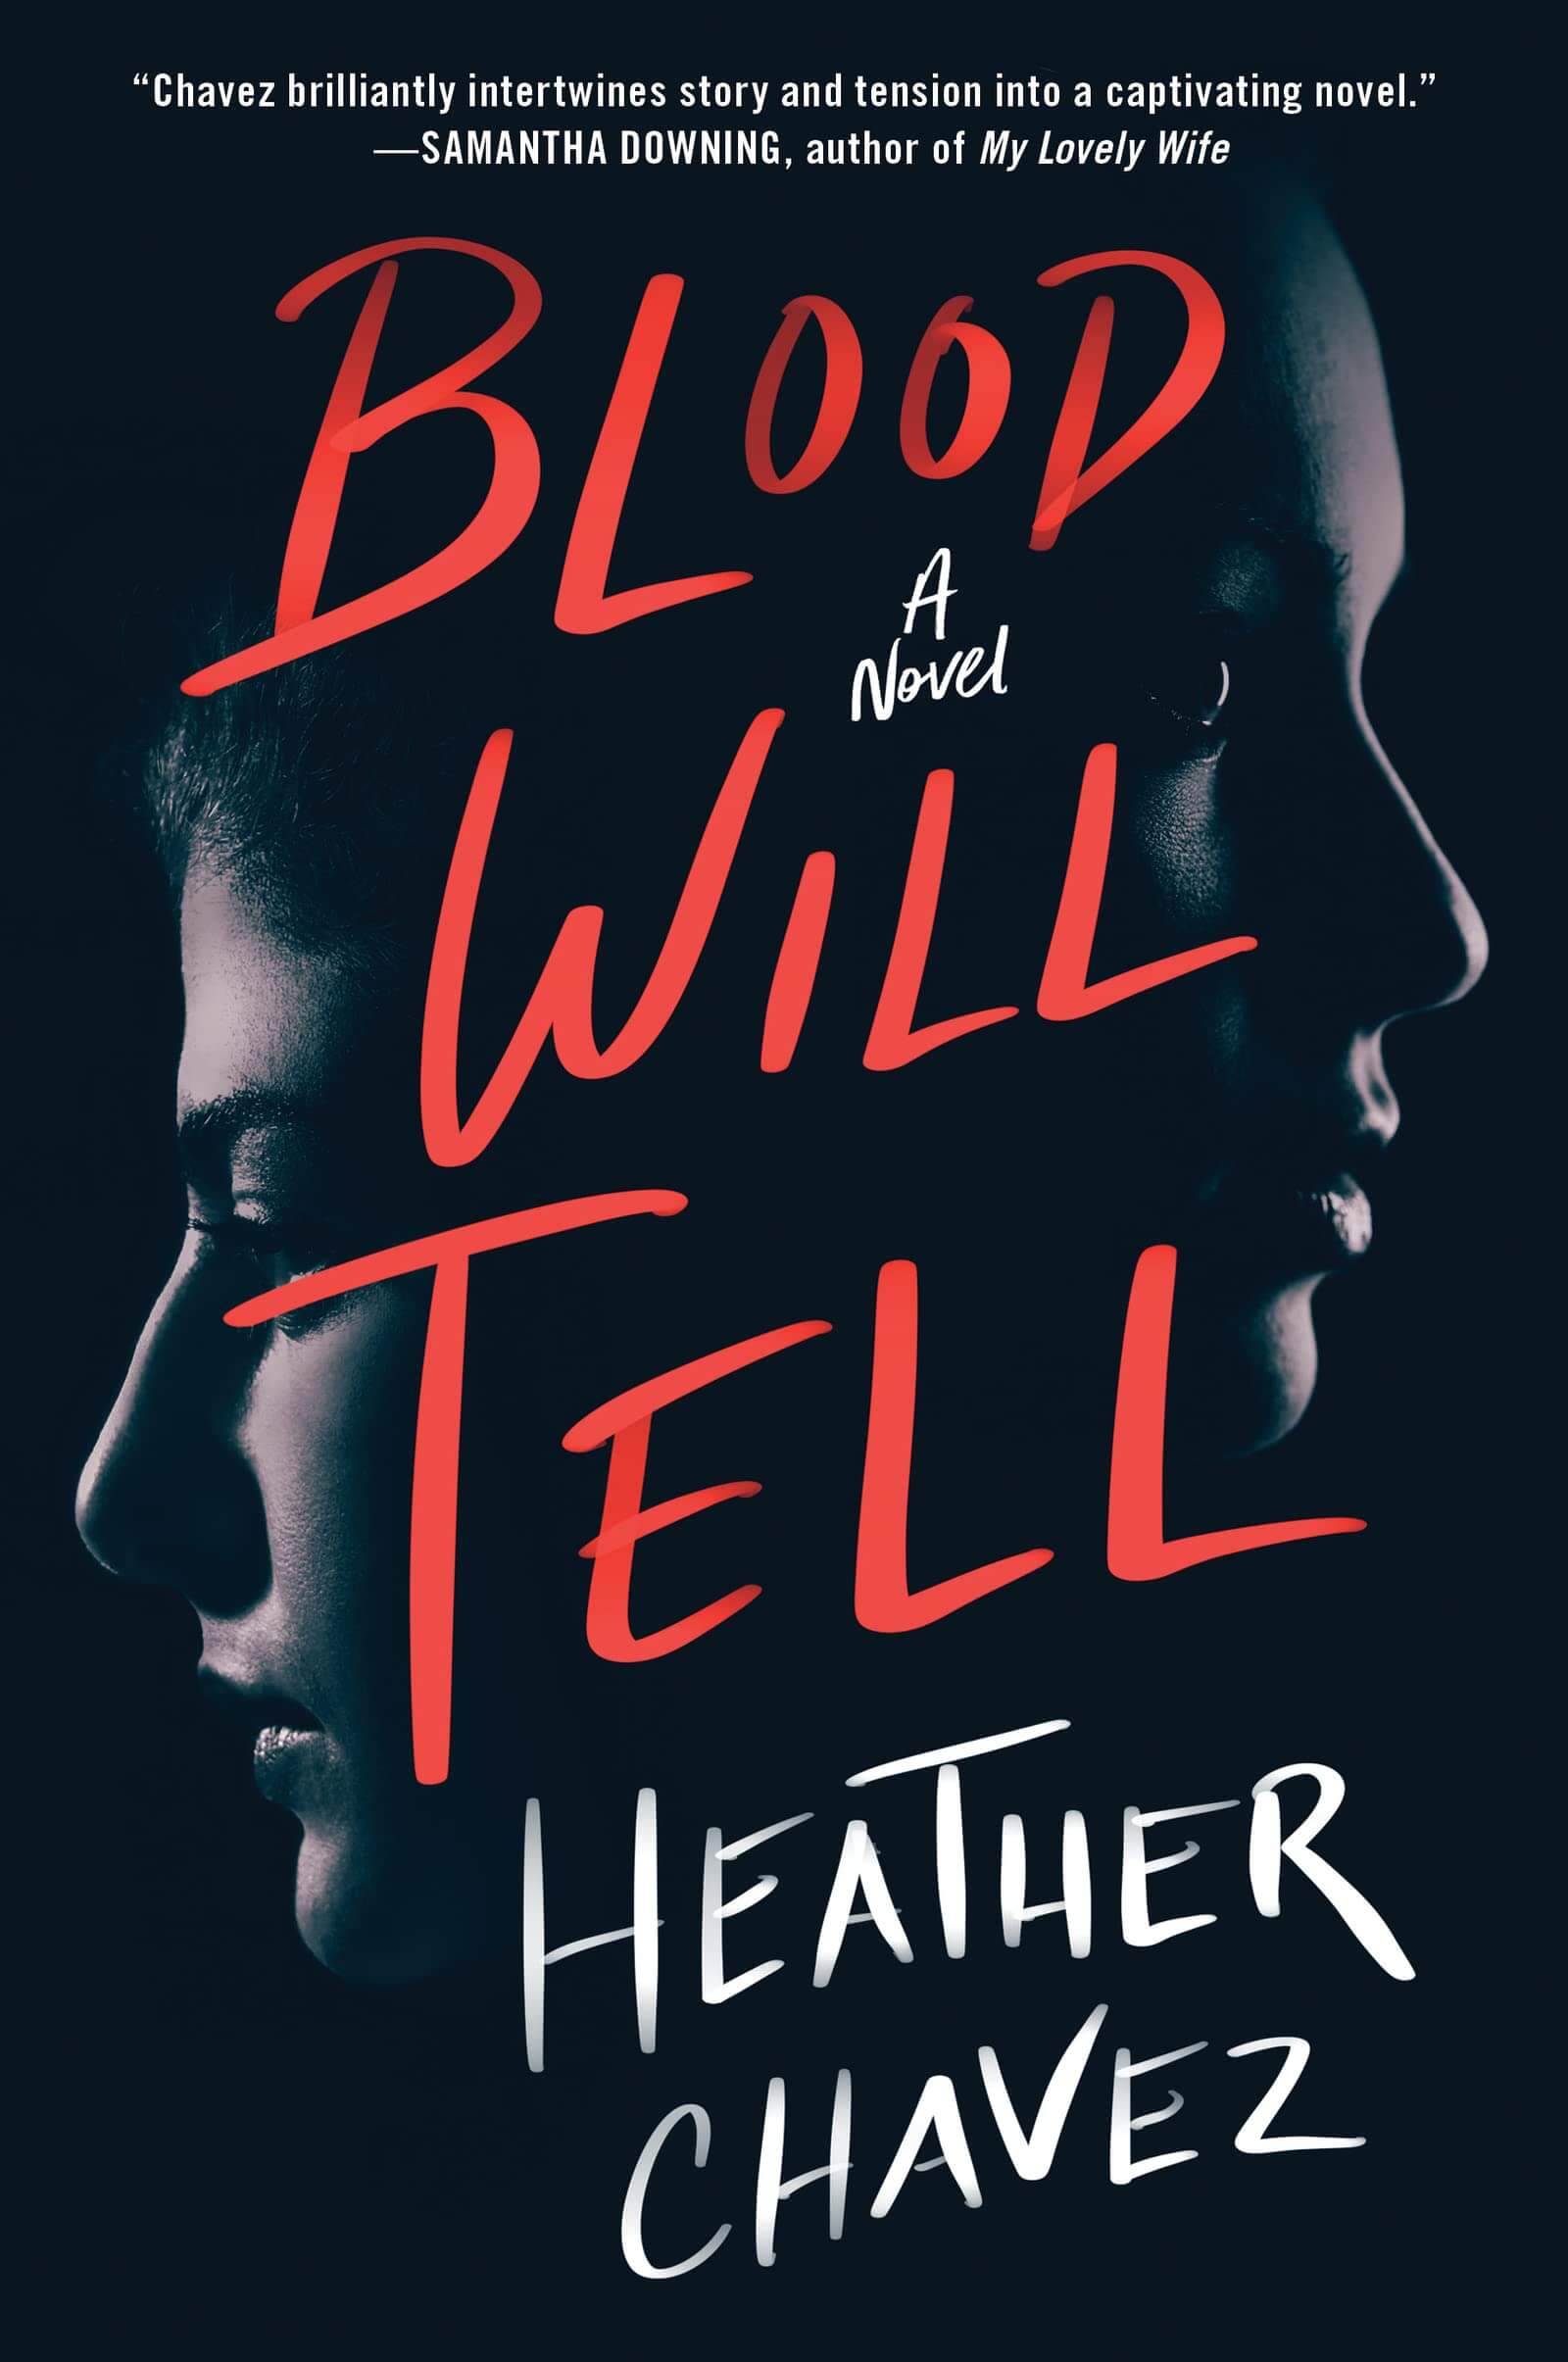 Cover of Blood Will Tell by Heather Chavez